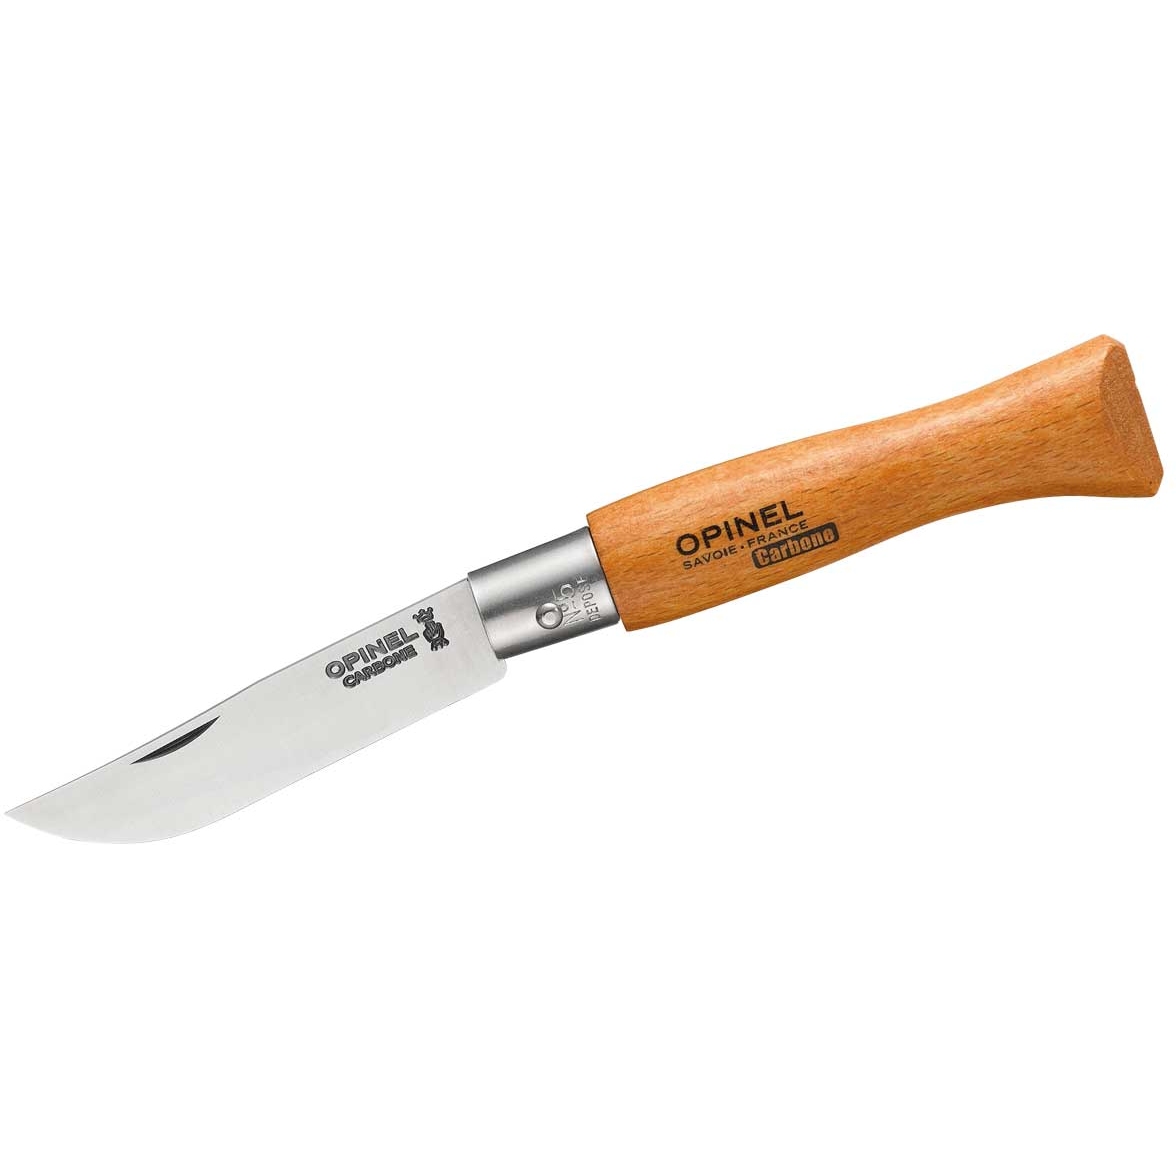 Image of Opinel Carbon Knife No 05 - beech